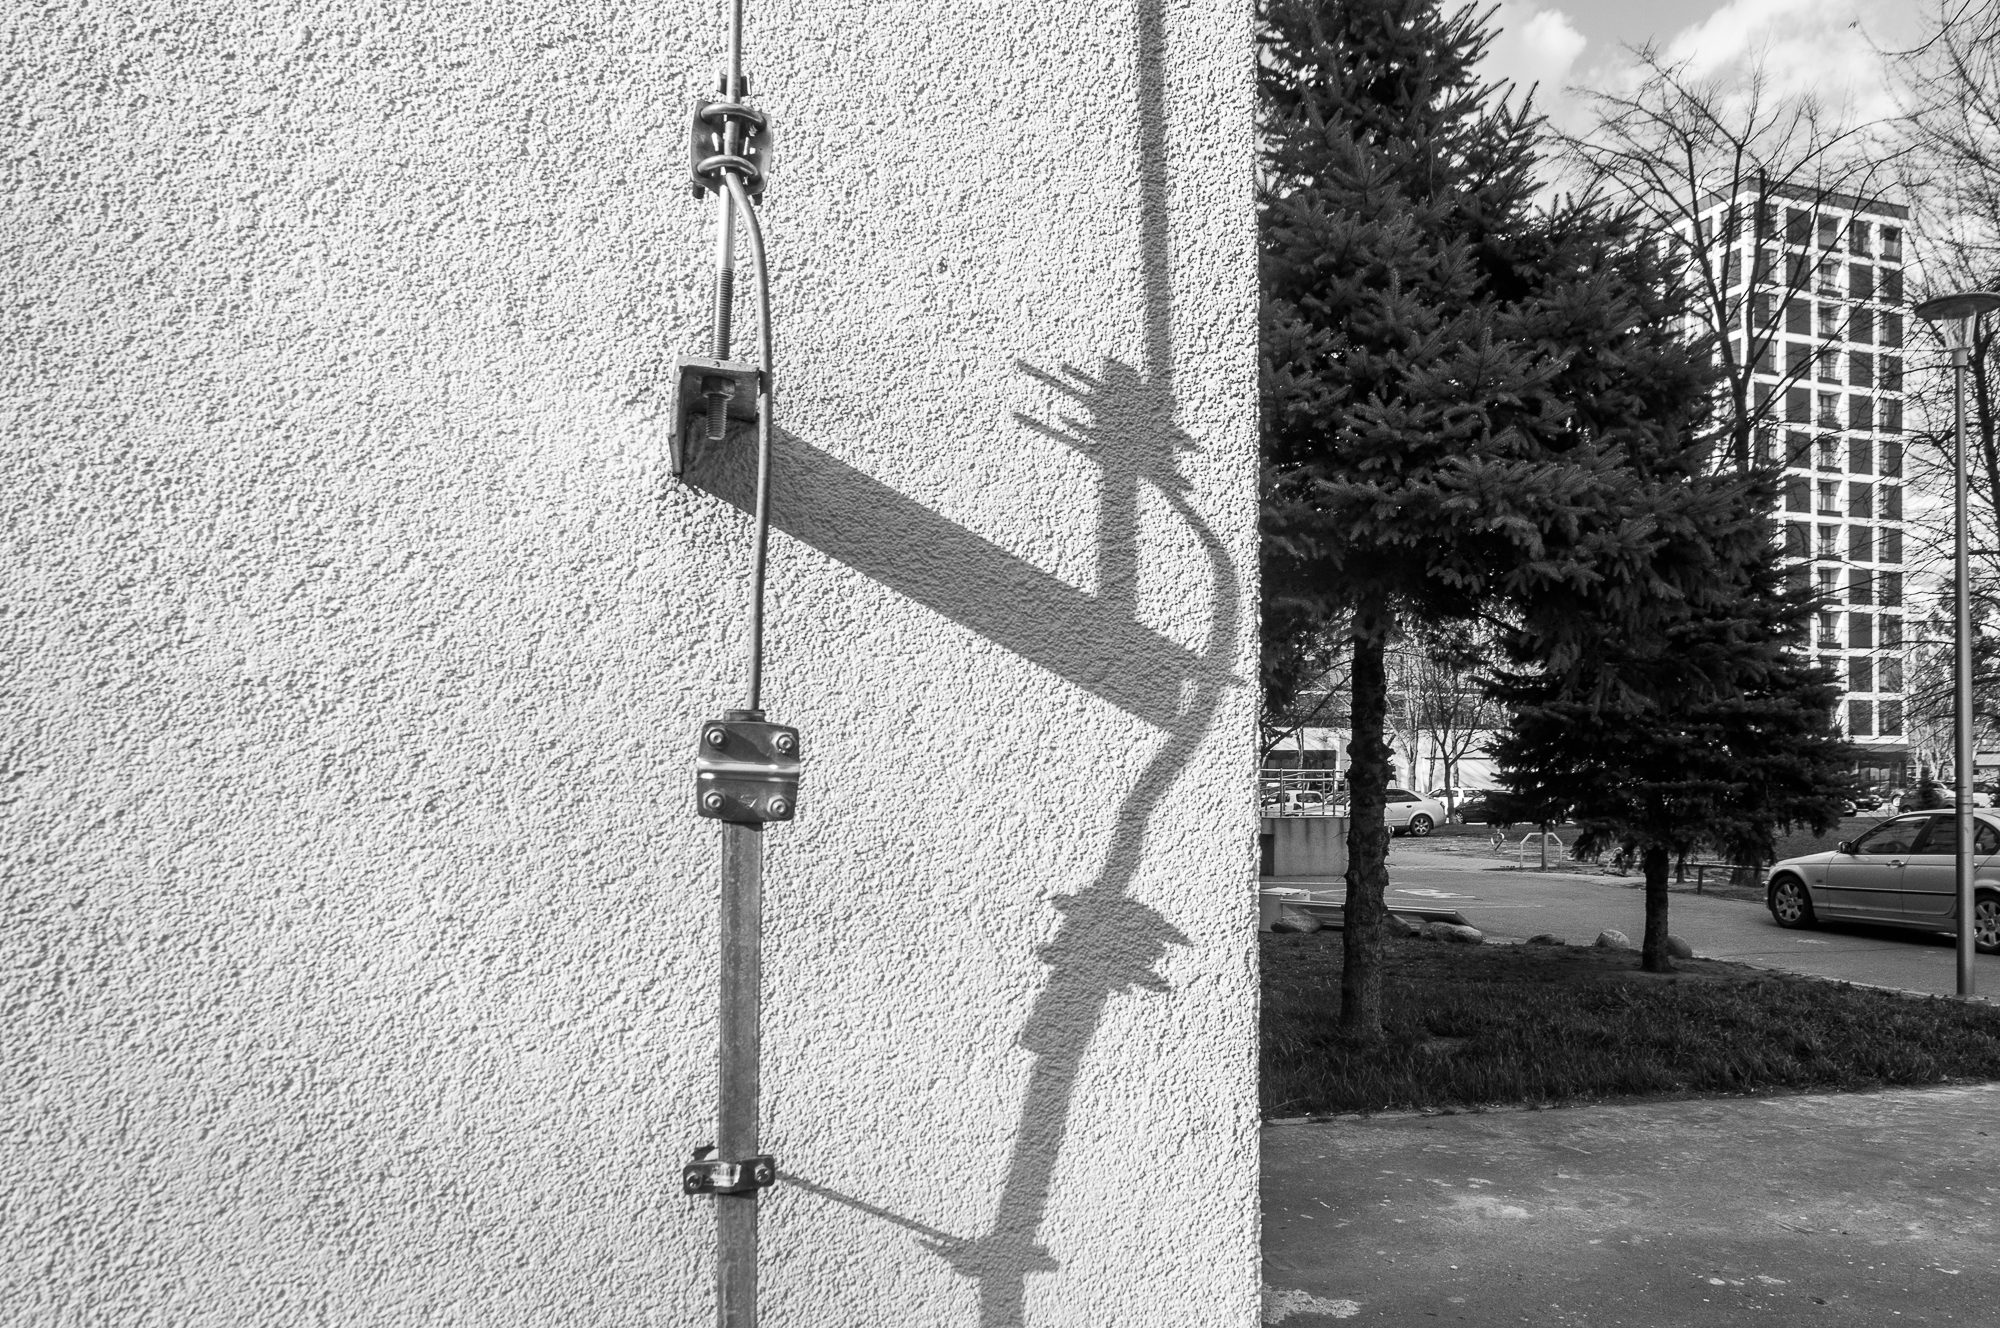 Adam Mazek Photography 2022. Warsaw Street Photography. Post: "War in Ukraine. I will try to write more about my insights and feelings." Minimalism. Shadow.